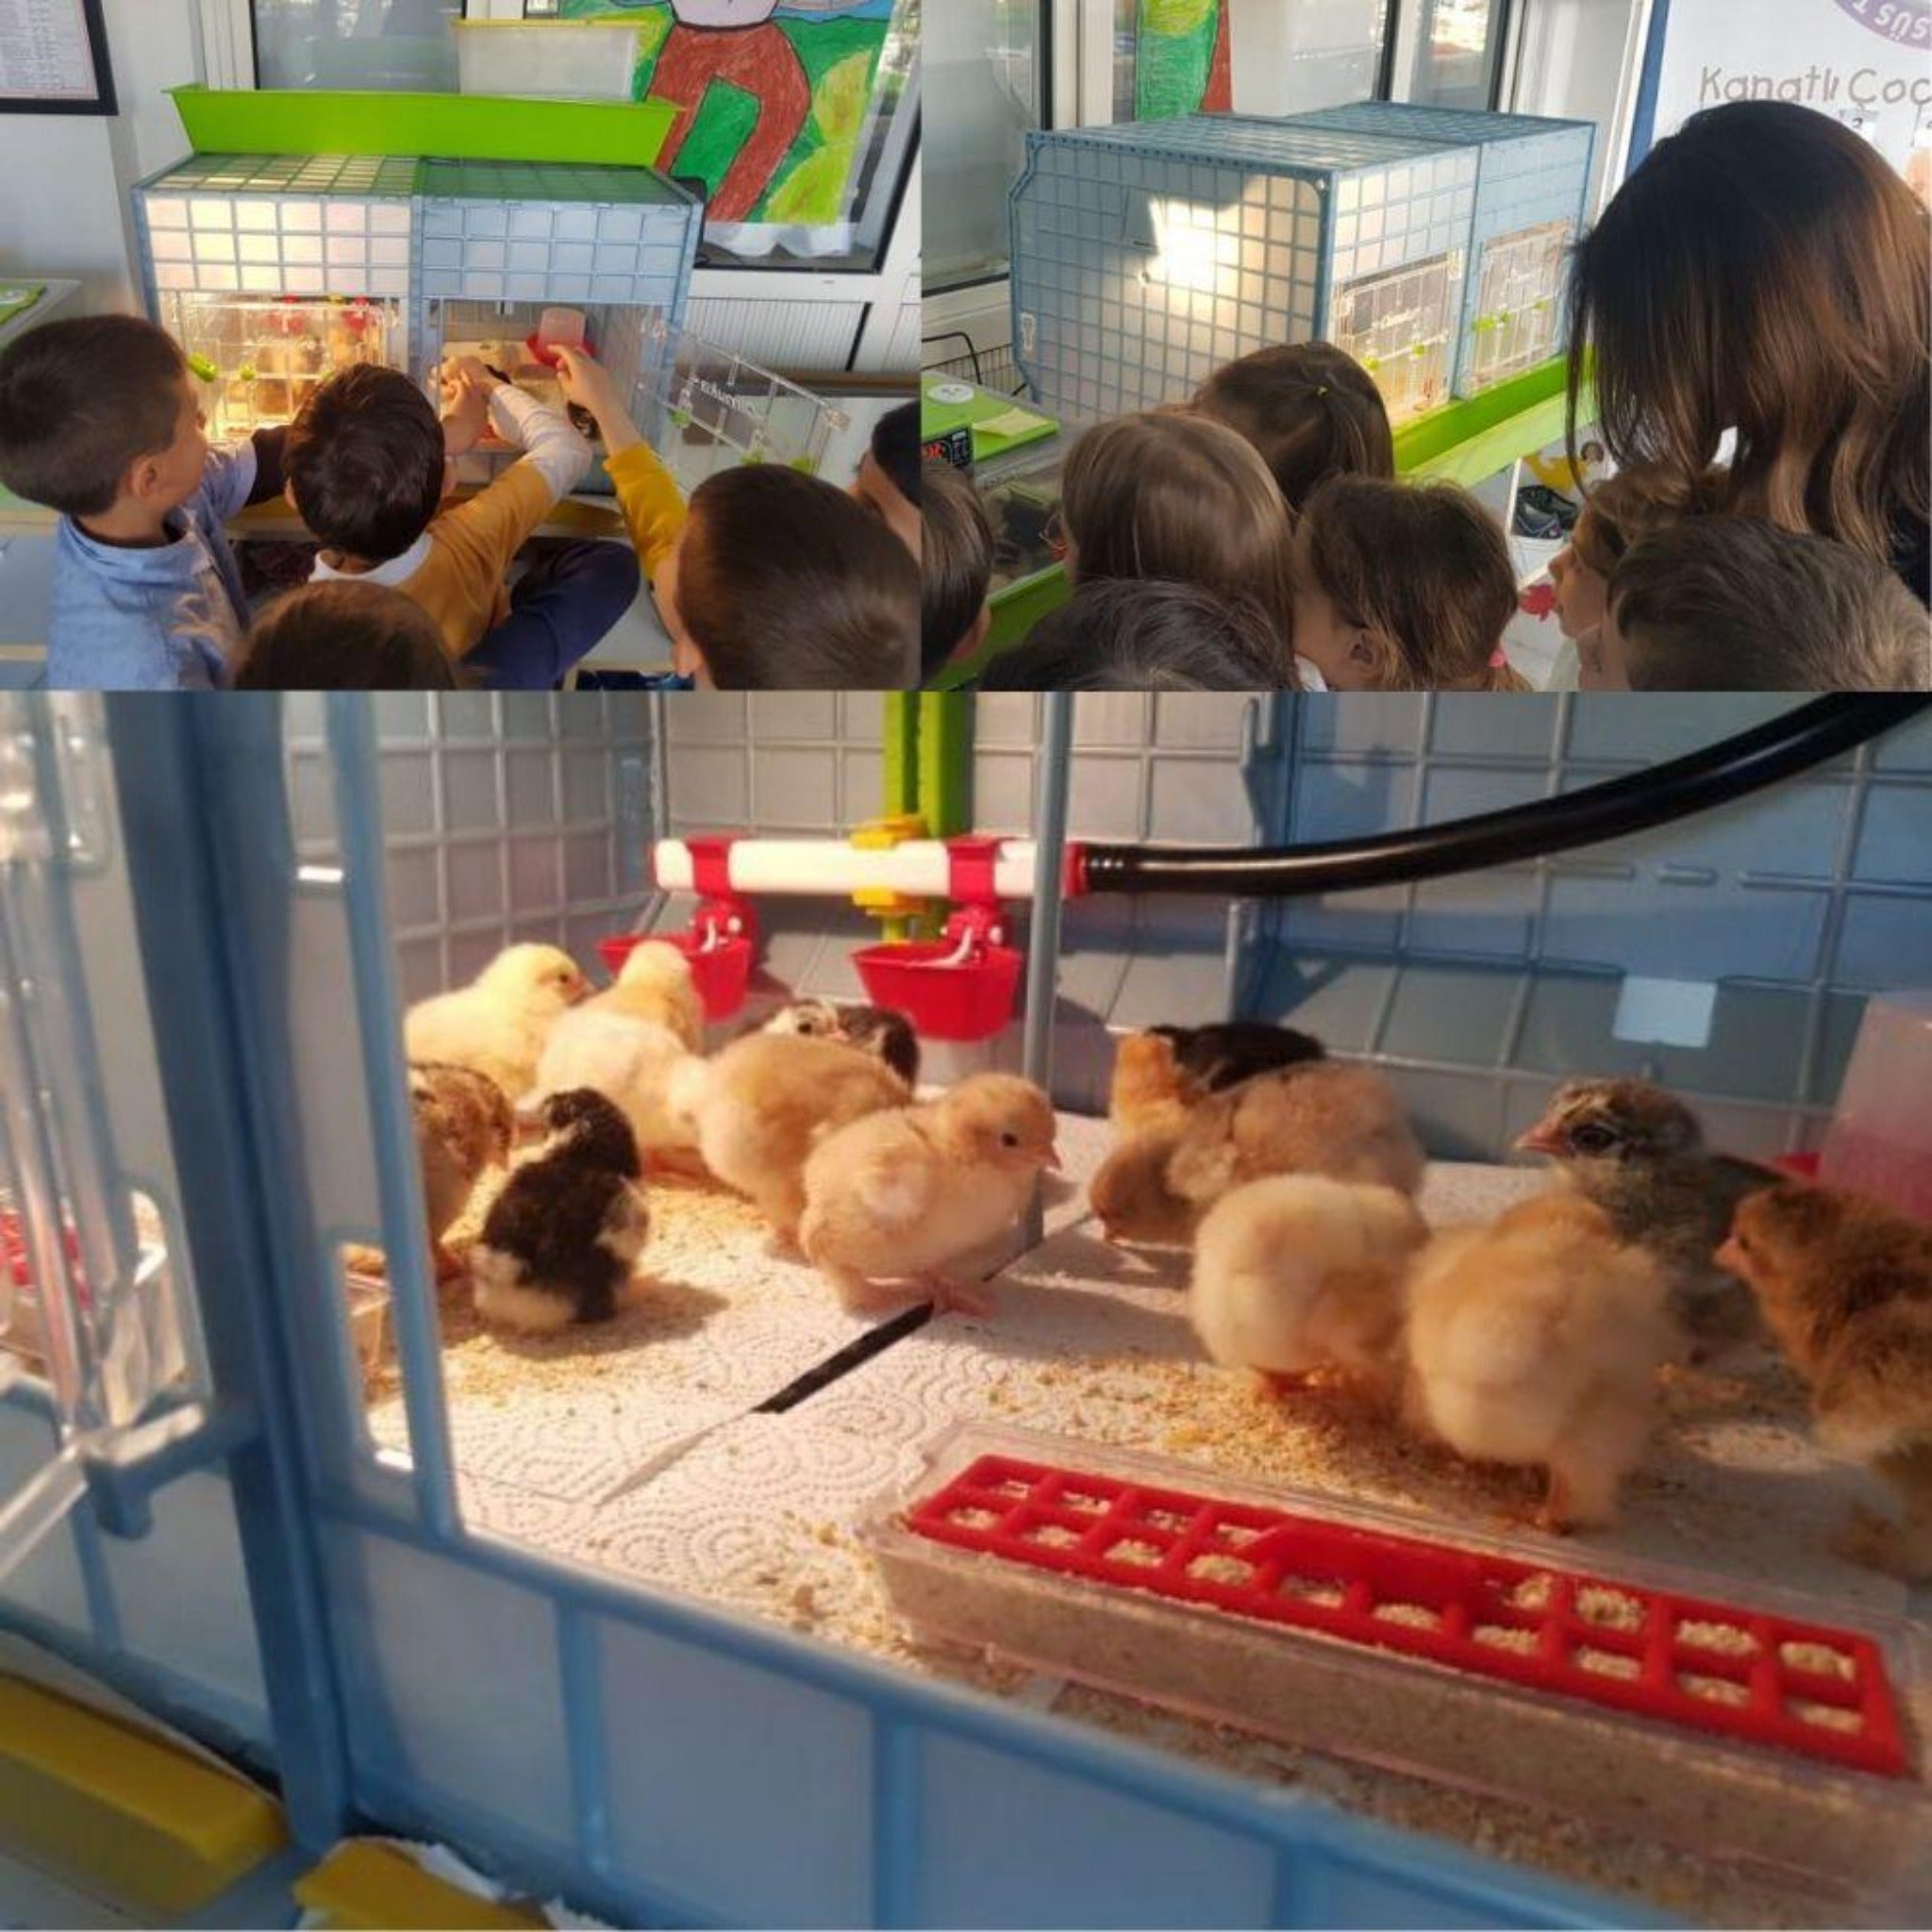 Hatching Time Cimuka images showing children petting chicks in brooder. Classroom space for poultry education.